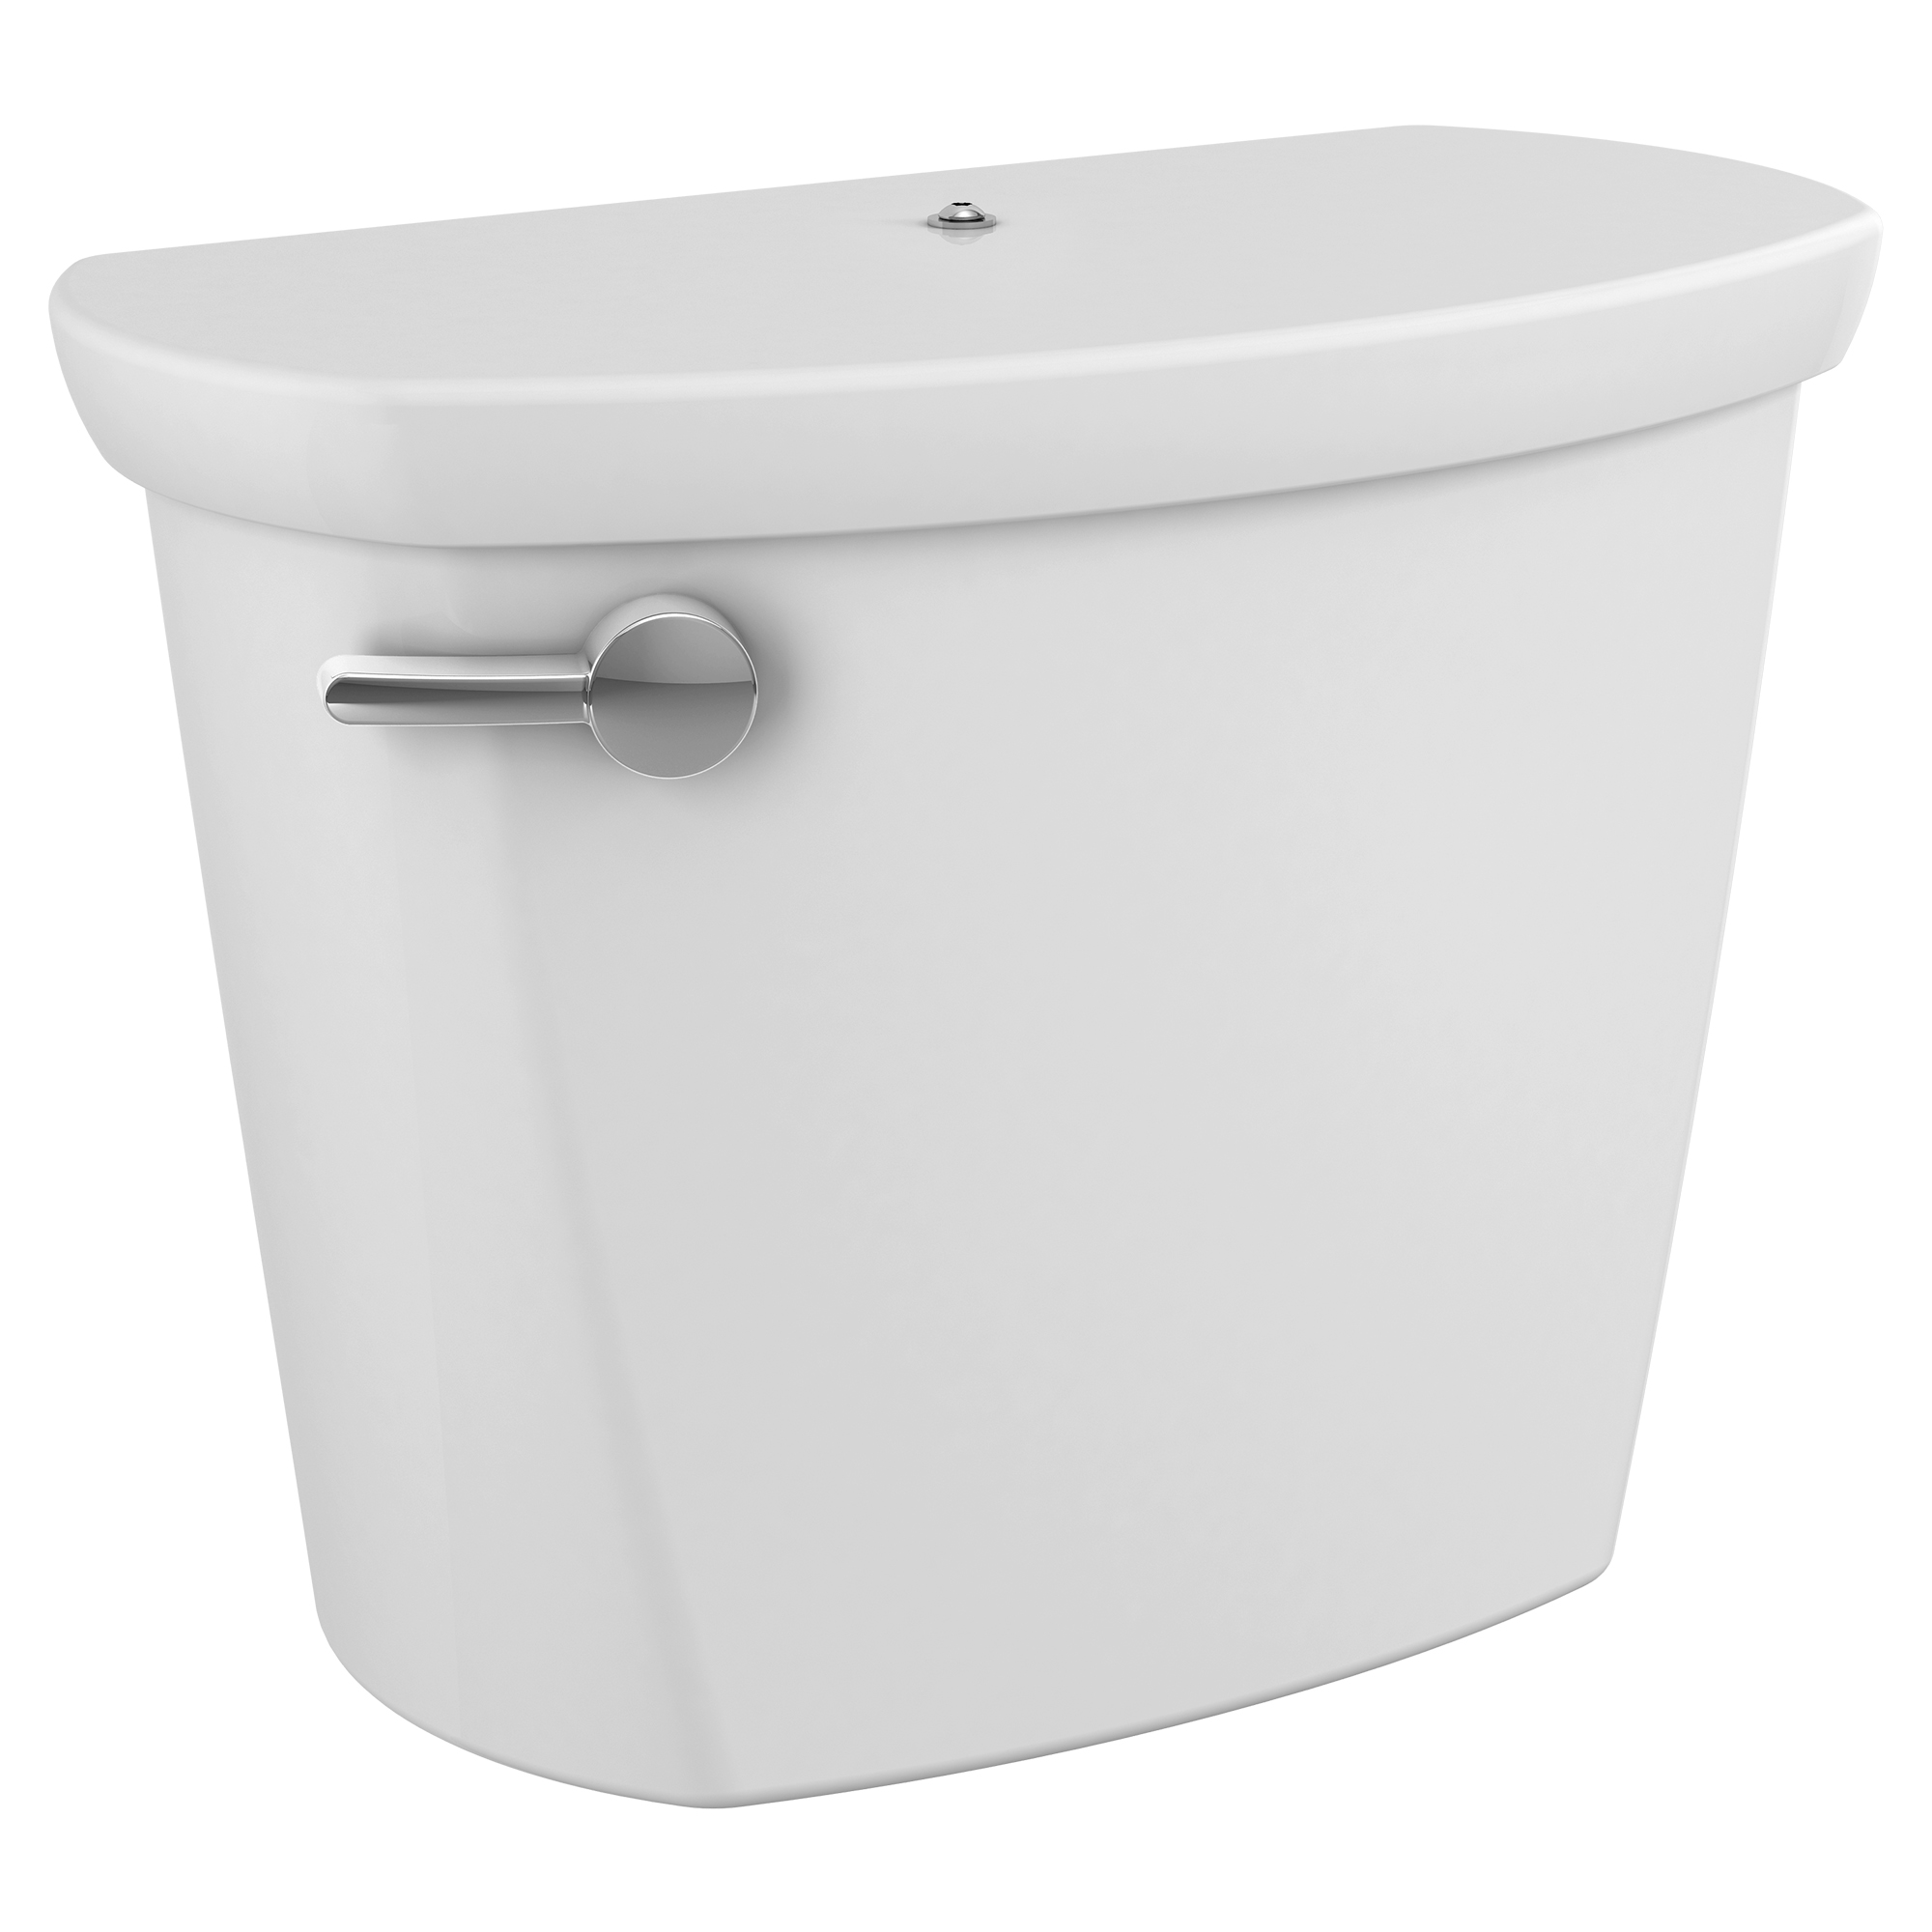 Cadet™ PRO 1.6 gpf/6.0 Lpf 12-Inch Toilet Tank with Aquaguard Liner and Tank Cover Locking Device